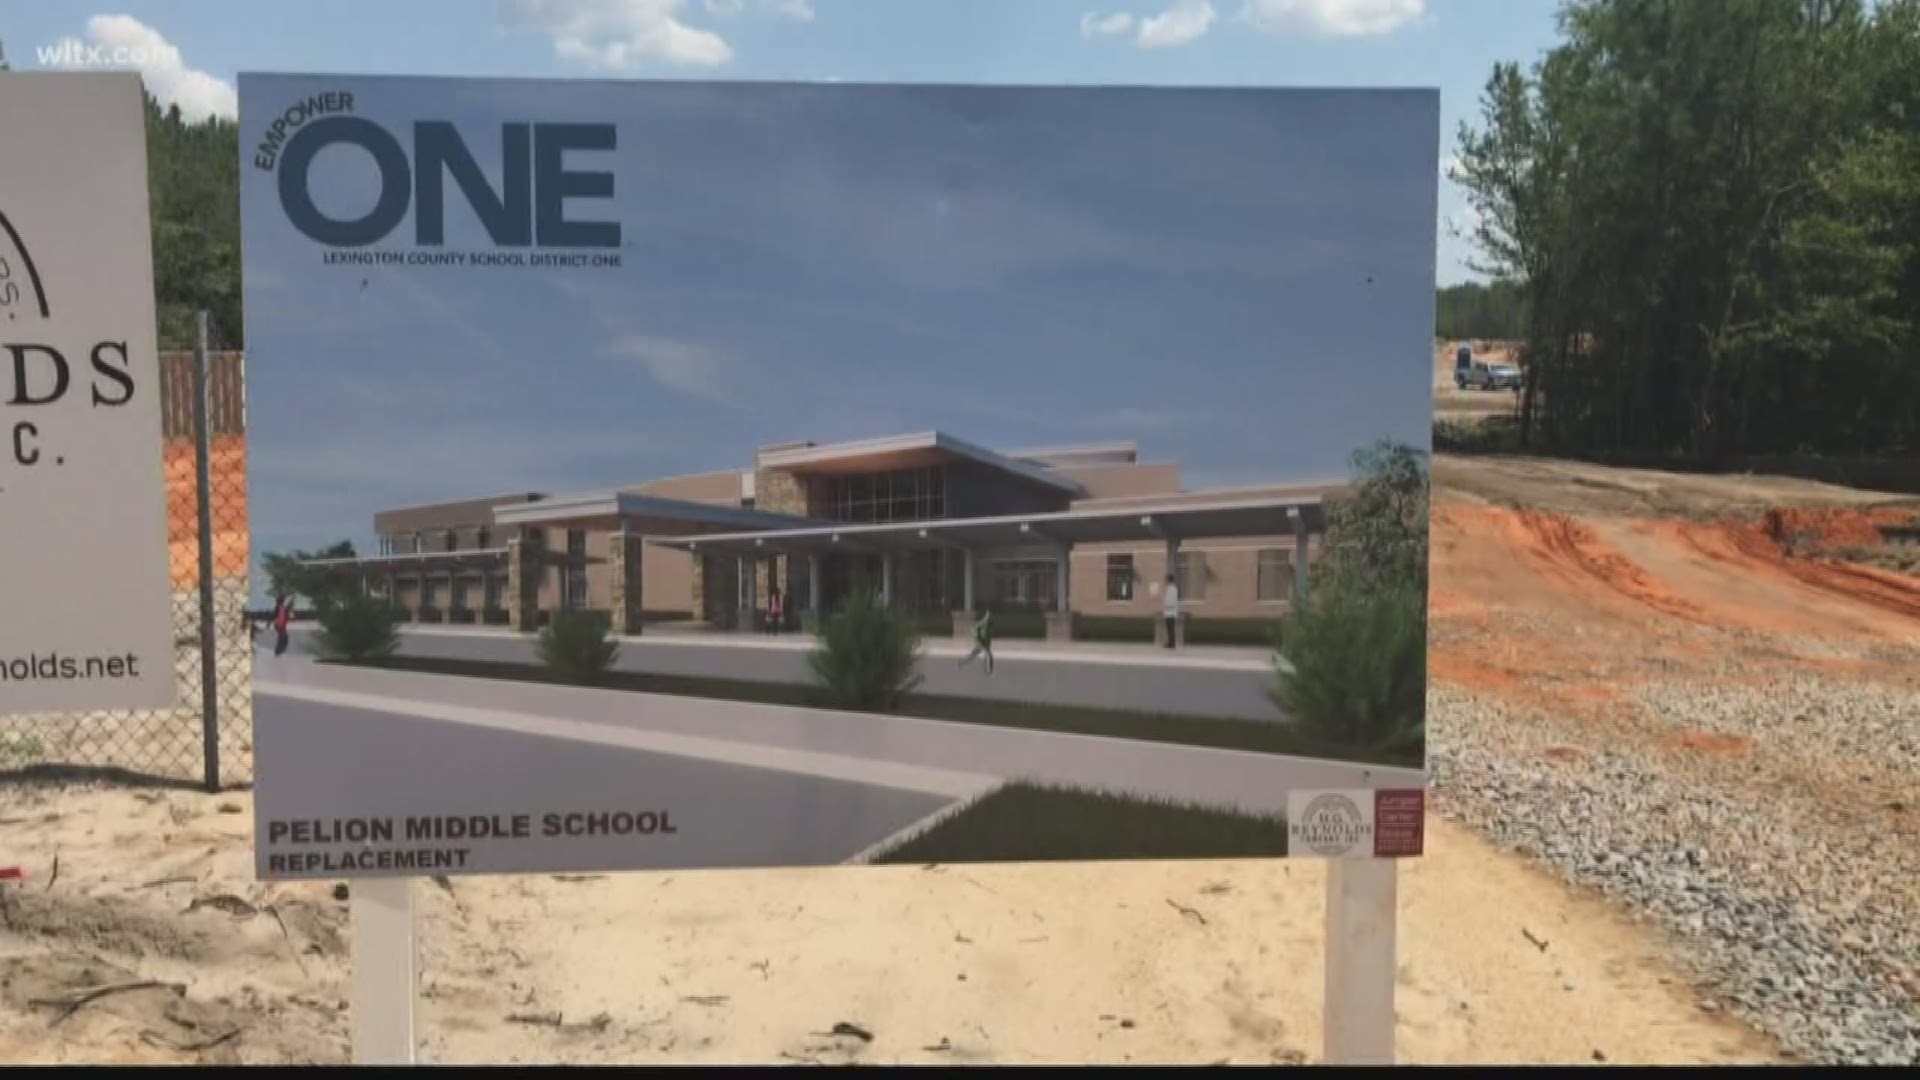 The school's building plan says they hope to be finished with construction by 2021-2022.